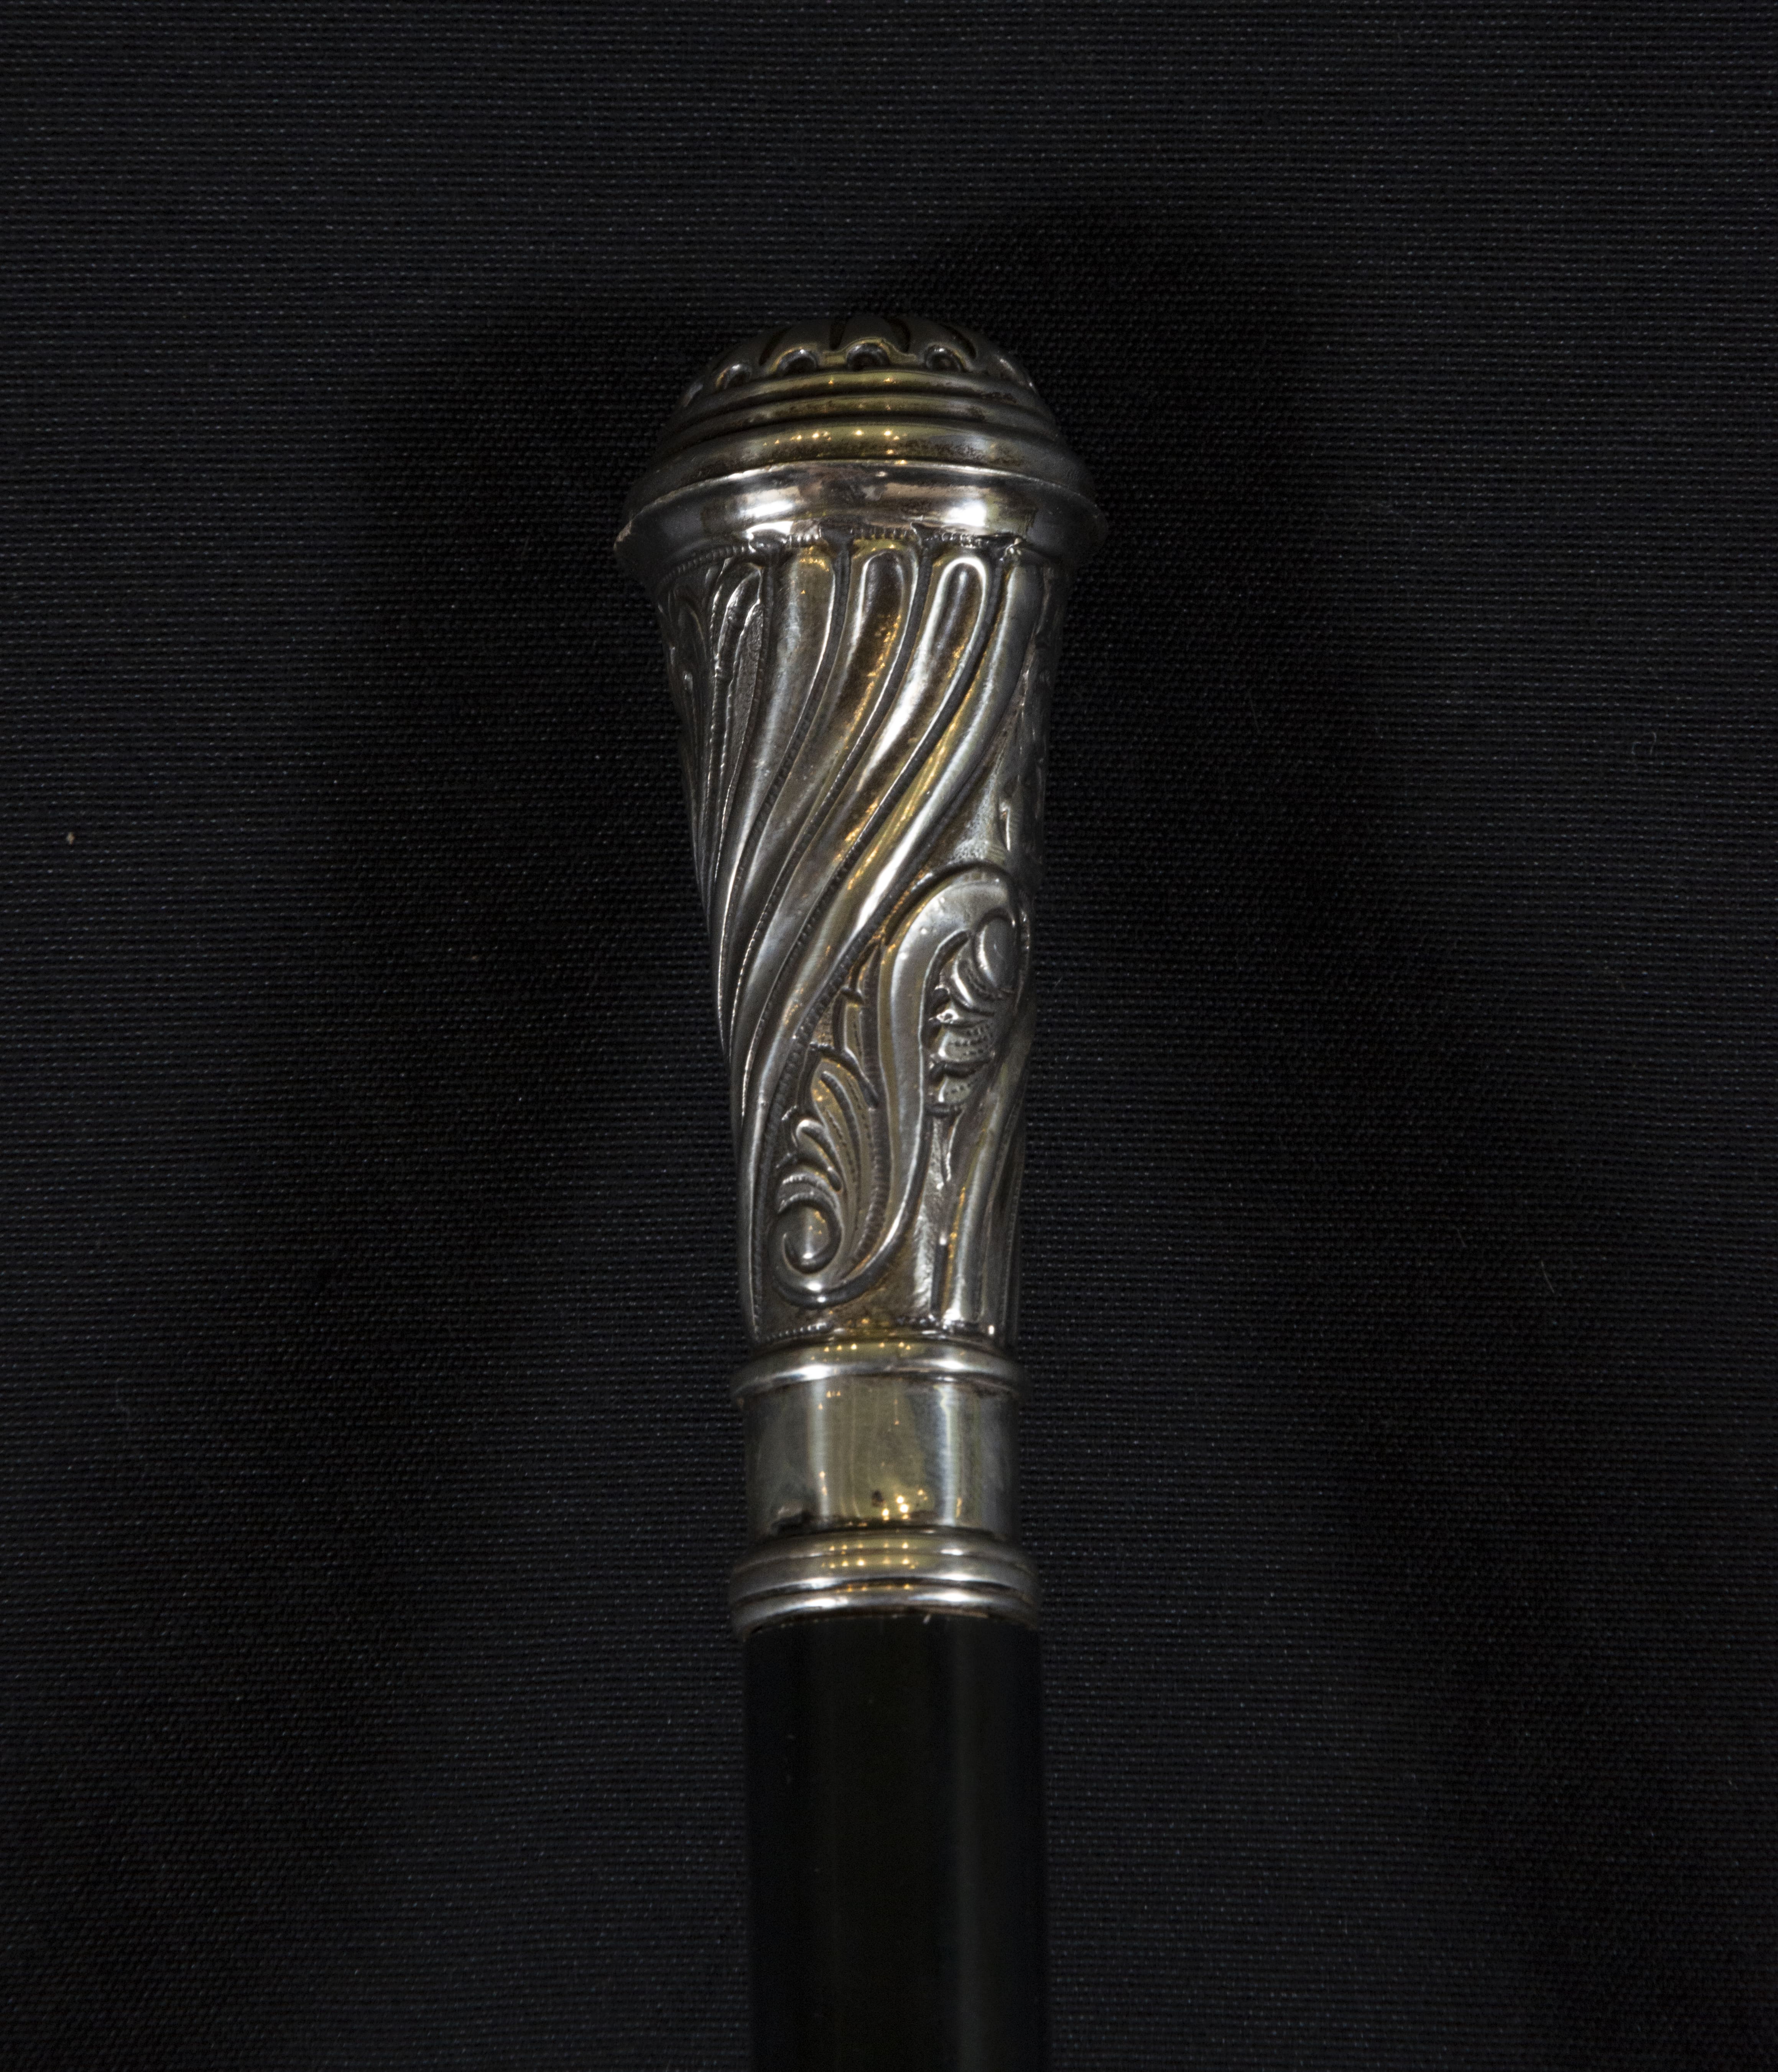 Elegant Victorian Walking Stick with ebony body and embossed silver handle in Rocalla style, 19th ce - Image 3 of 3